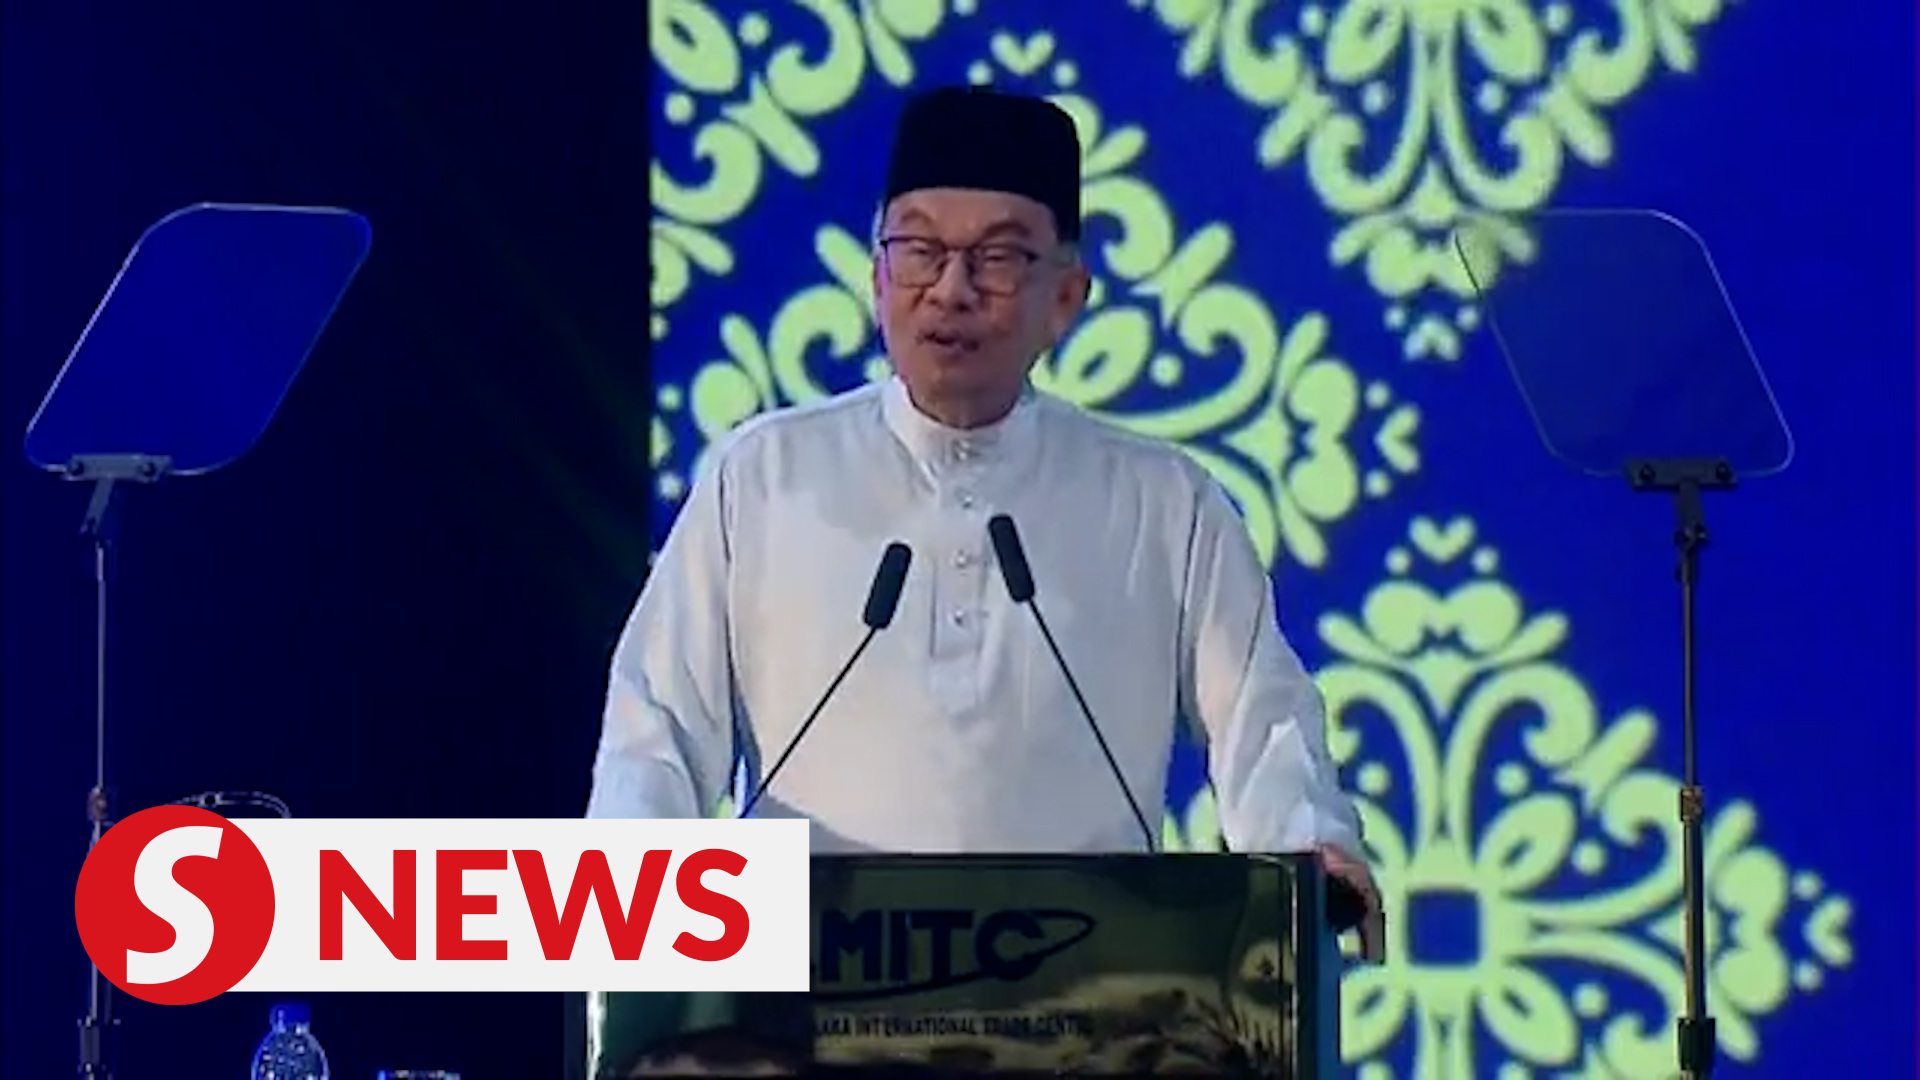 Find ways to stimulate children’s interest in science and technology, Anwar tells Education Ministry